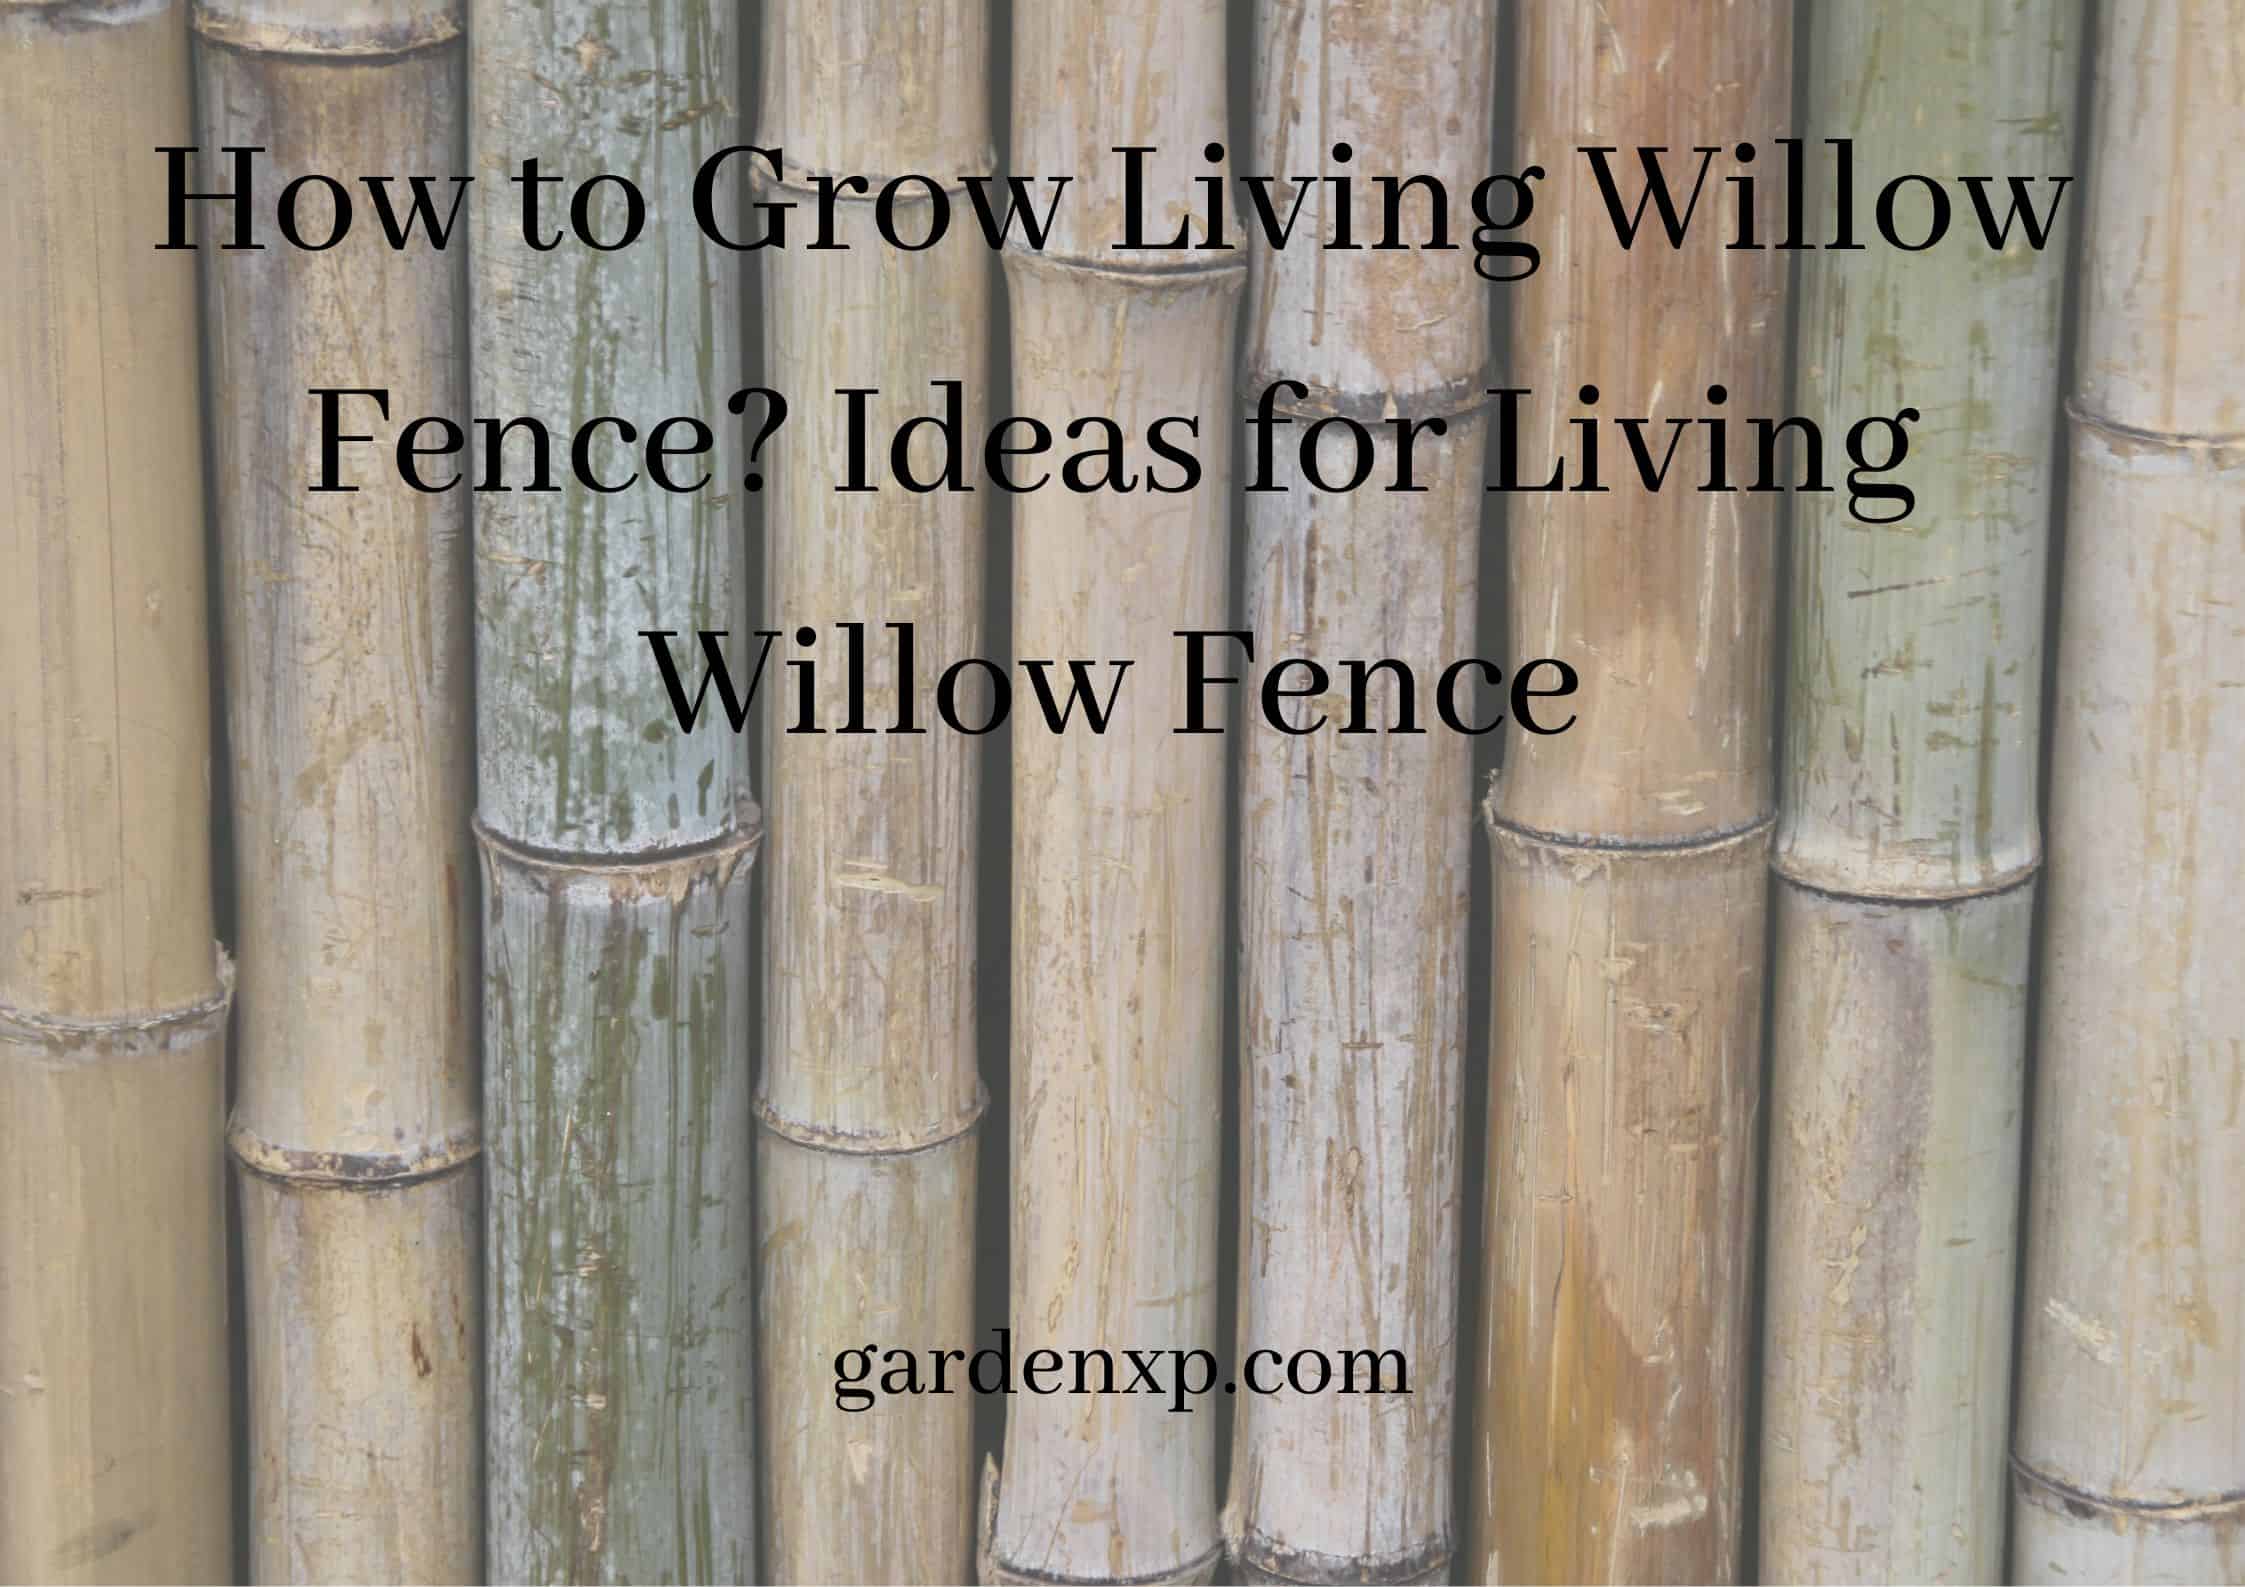 How to Grow Living Willow Fence? Ideas for Living Willow Fence